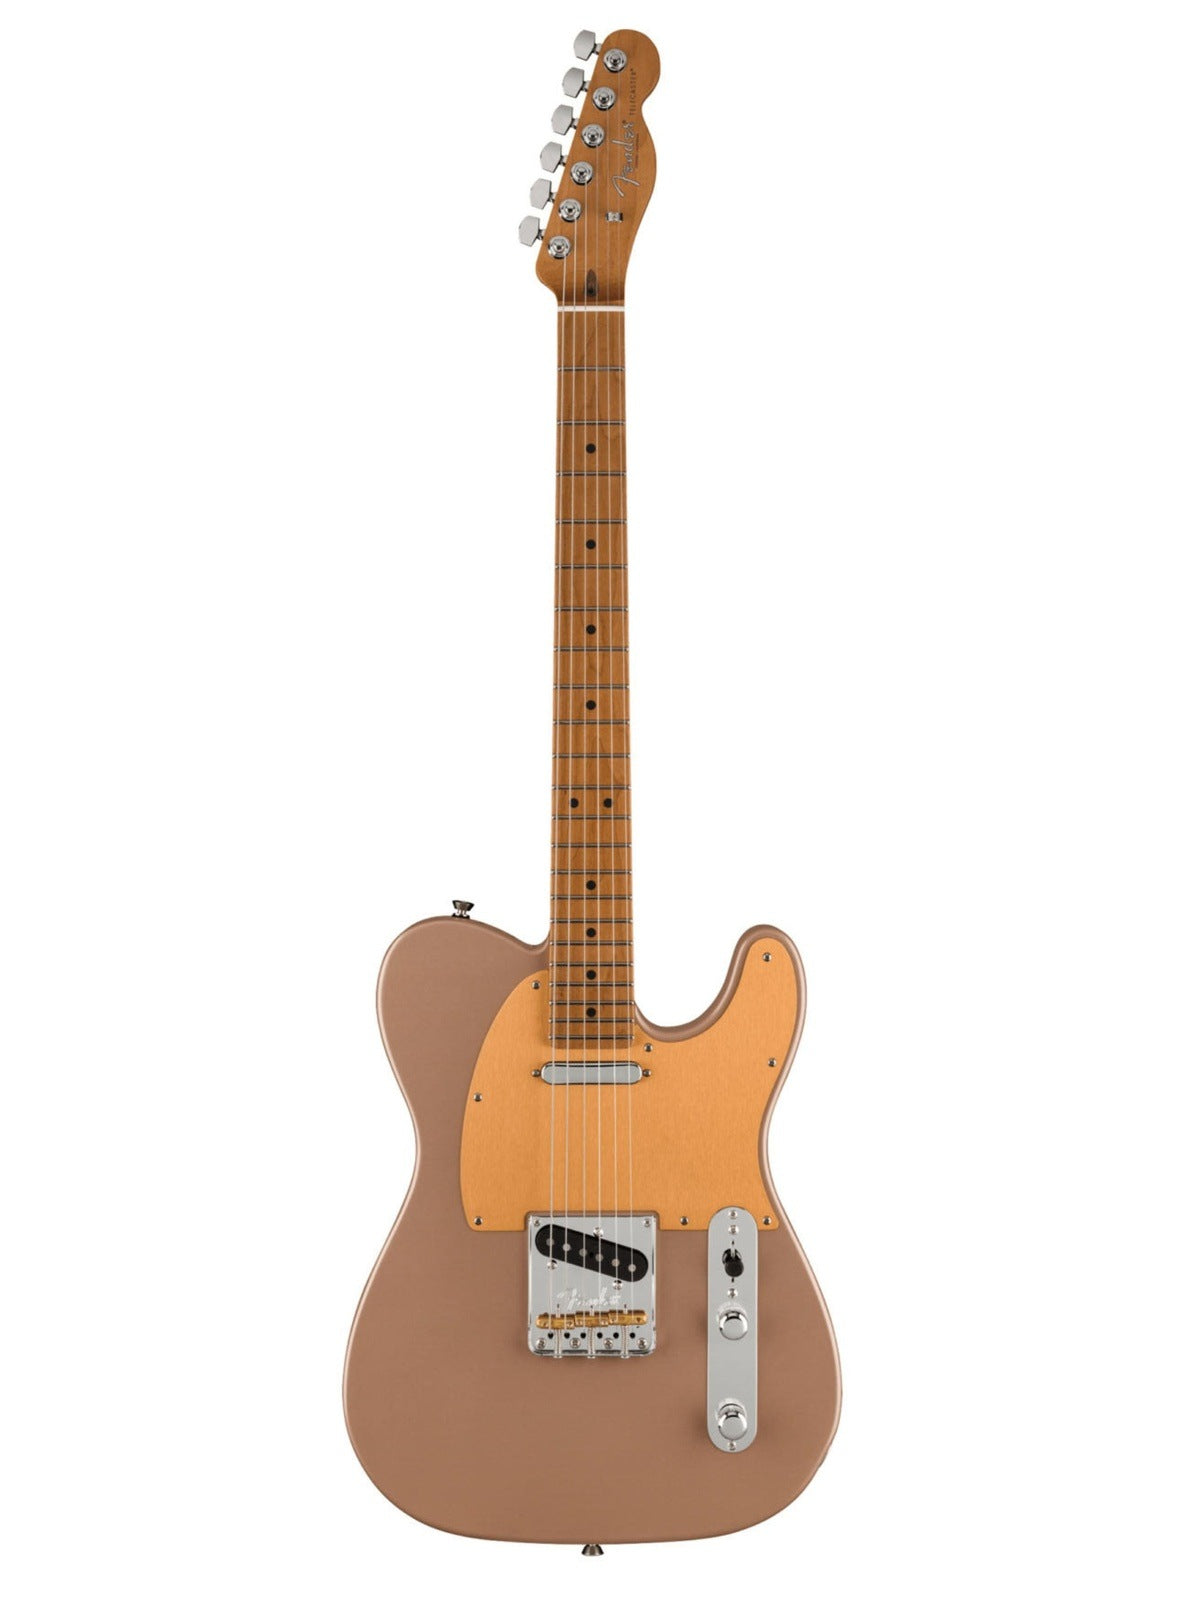 Fender American Professional II Limited Edition Telecaster in Shoreline Gold, MN